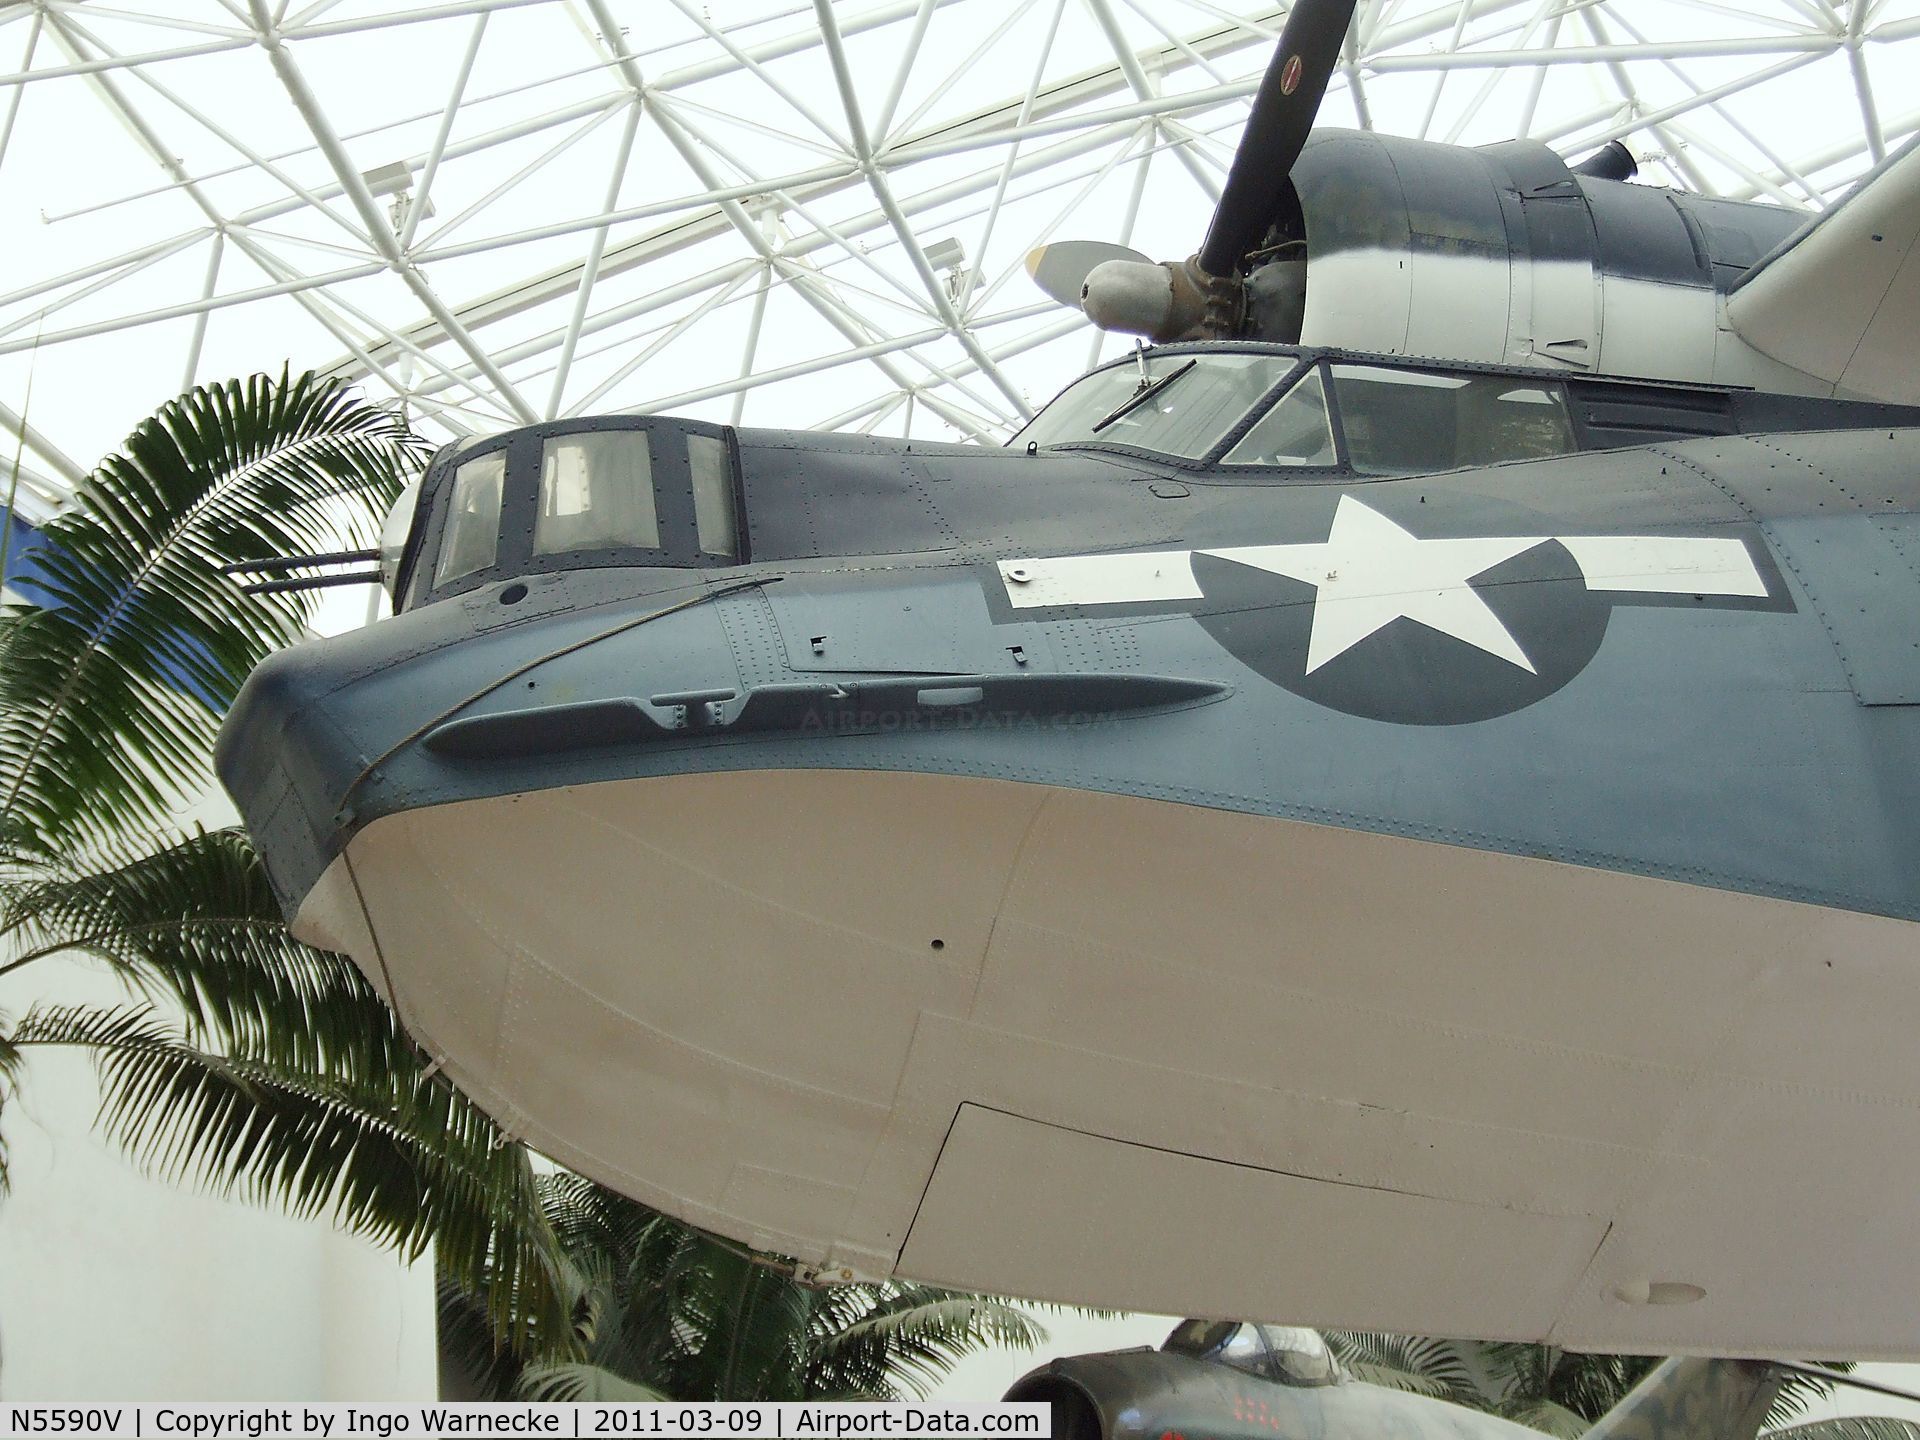 N5590V, Consolidated Vultee 28-5ACF C/N 1768 (USN48406), Consolidated PBY-5A Catalina at the San Diego Air & Space Museum, San Diego CA